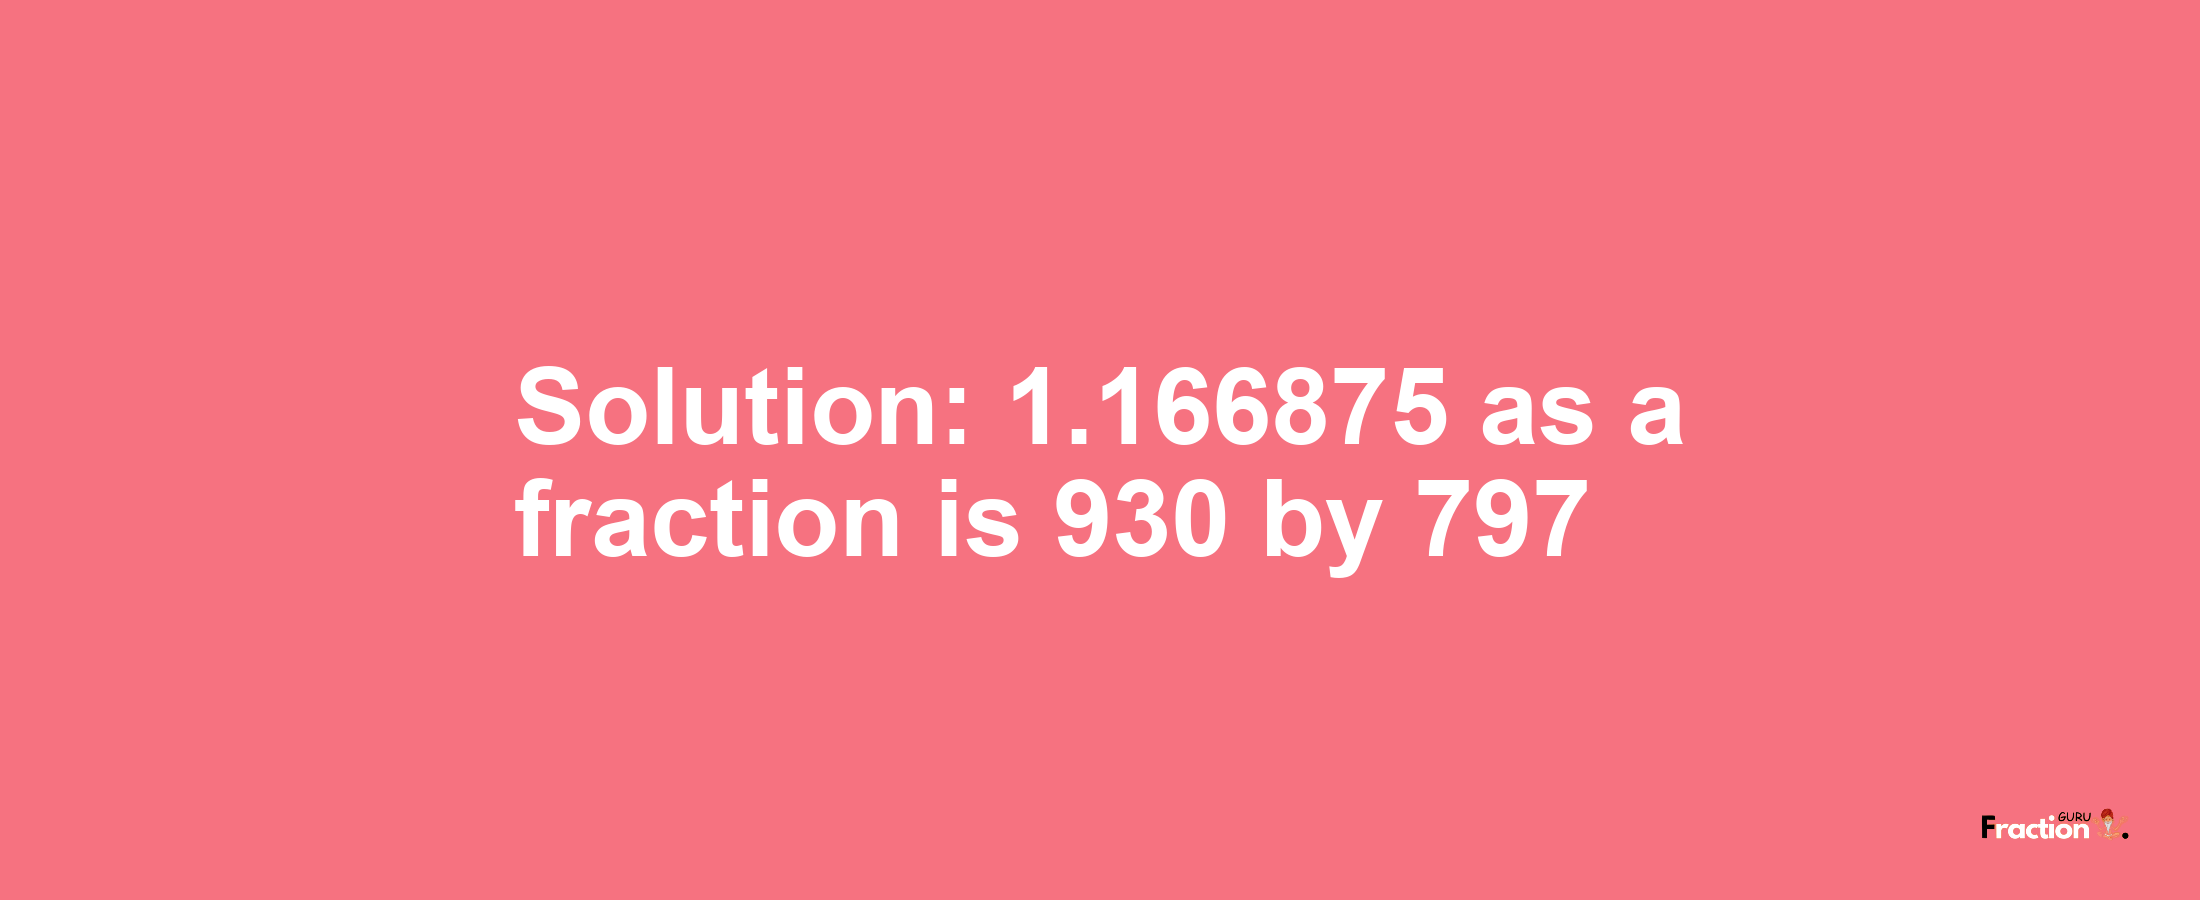 Solution:1.166875 as a fraction is 930/797